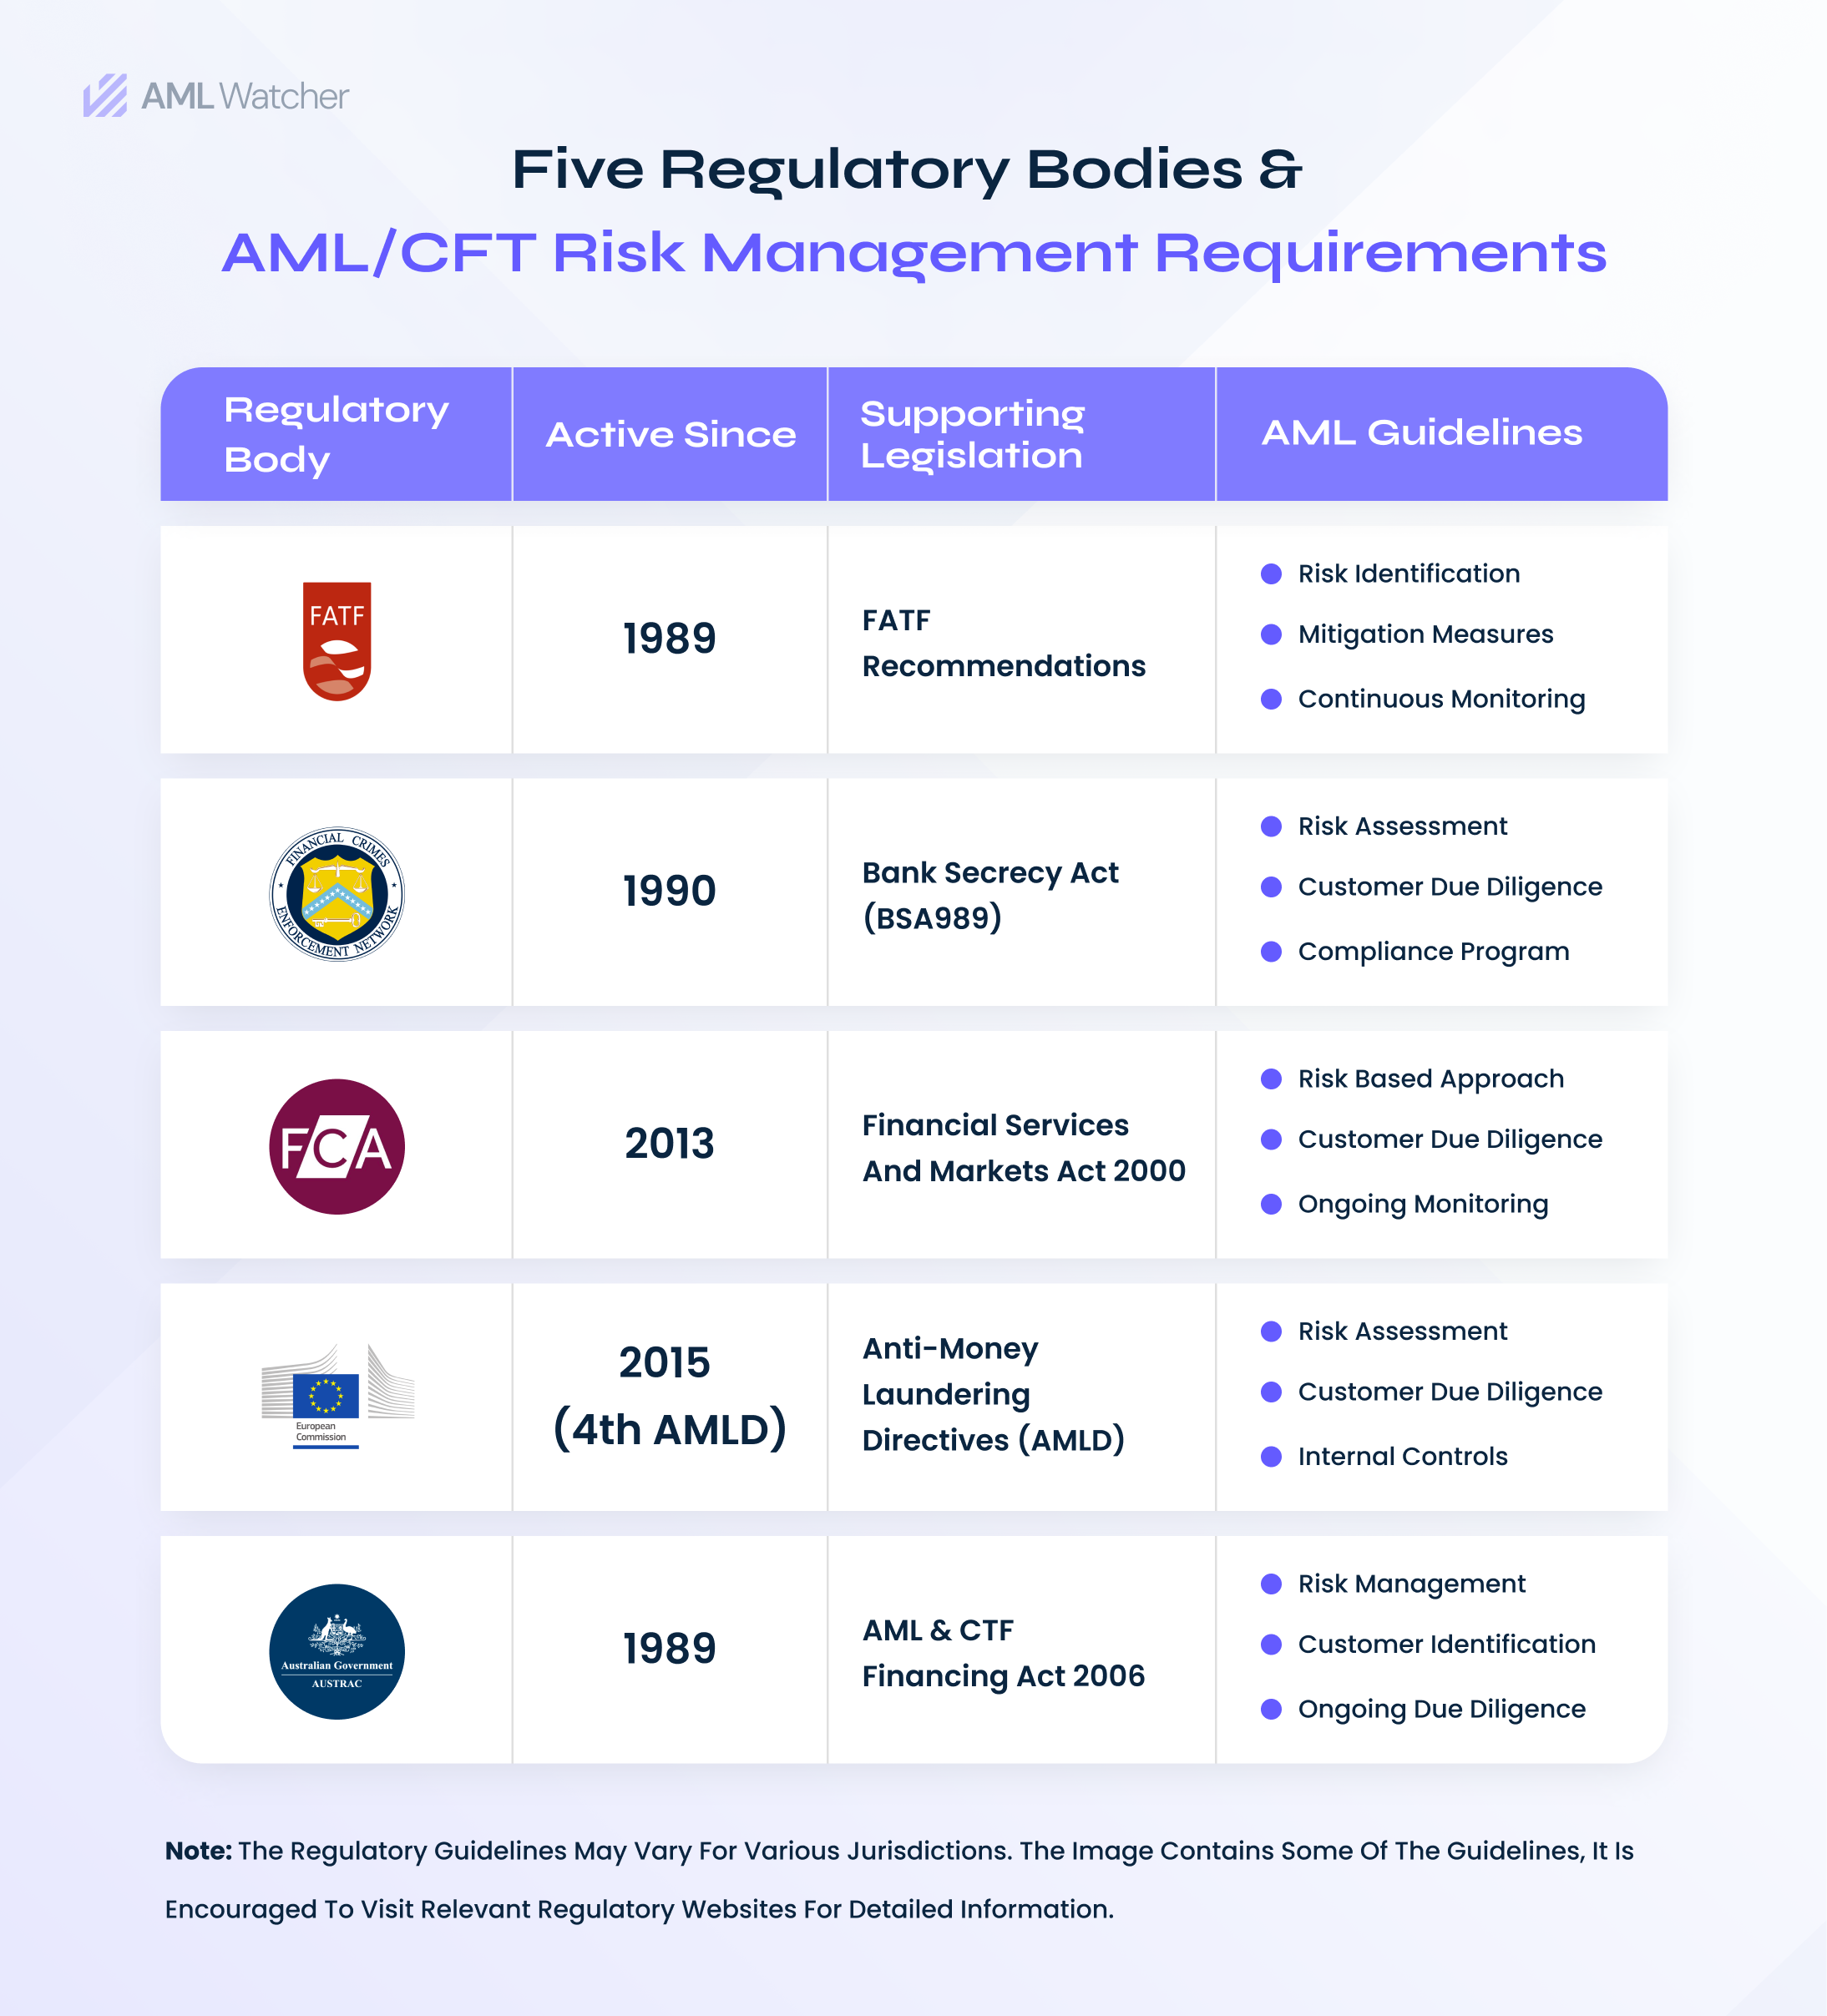 The featured image displays five prominent regulatory bodies. The section includes the founding/active year of each regulatory body, their legislation, and AML risk assessment or compliance requirements.